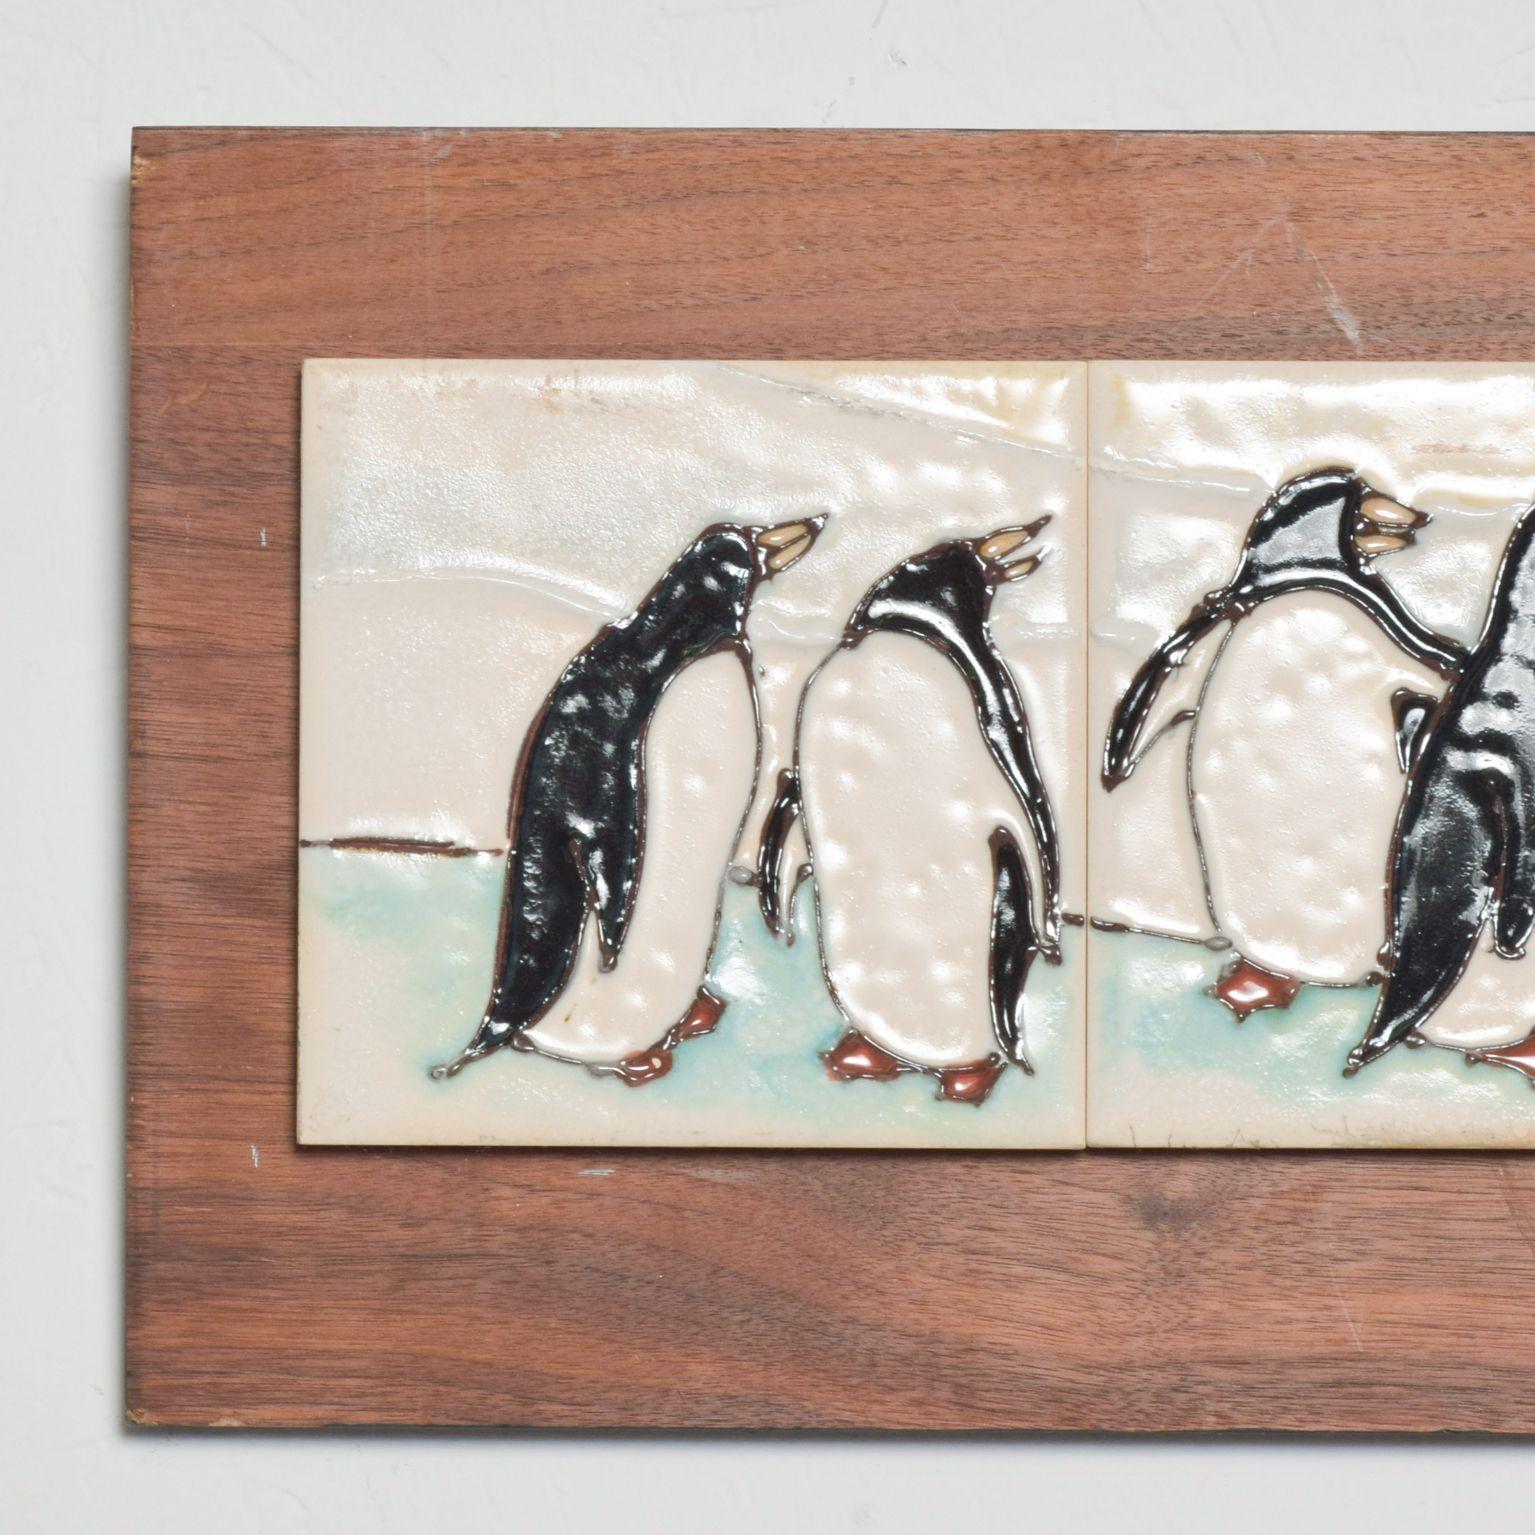 Wall Art
Harris Strong Penguin Tile Wall Art Wood Plaque  Midcentury Modern Art 1960s
Dimensions: 26 W x 10 H x 1 D, Tiles 24 W x 6 H
Framed Art. Original Vintage Preowned Presentation. 
Refer to images please.

